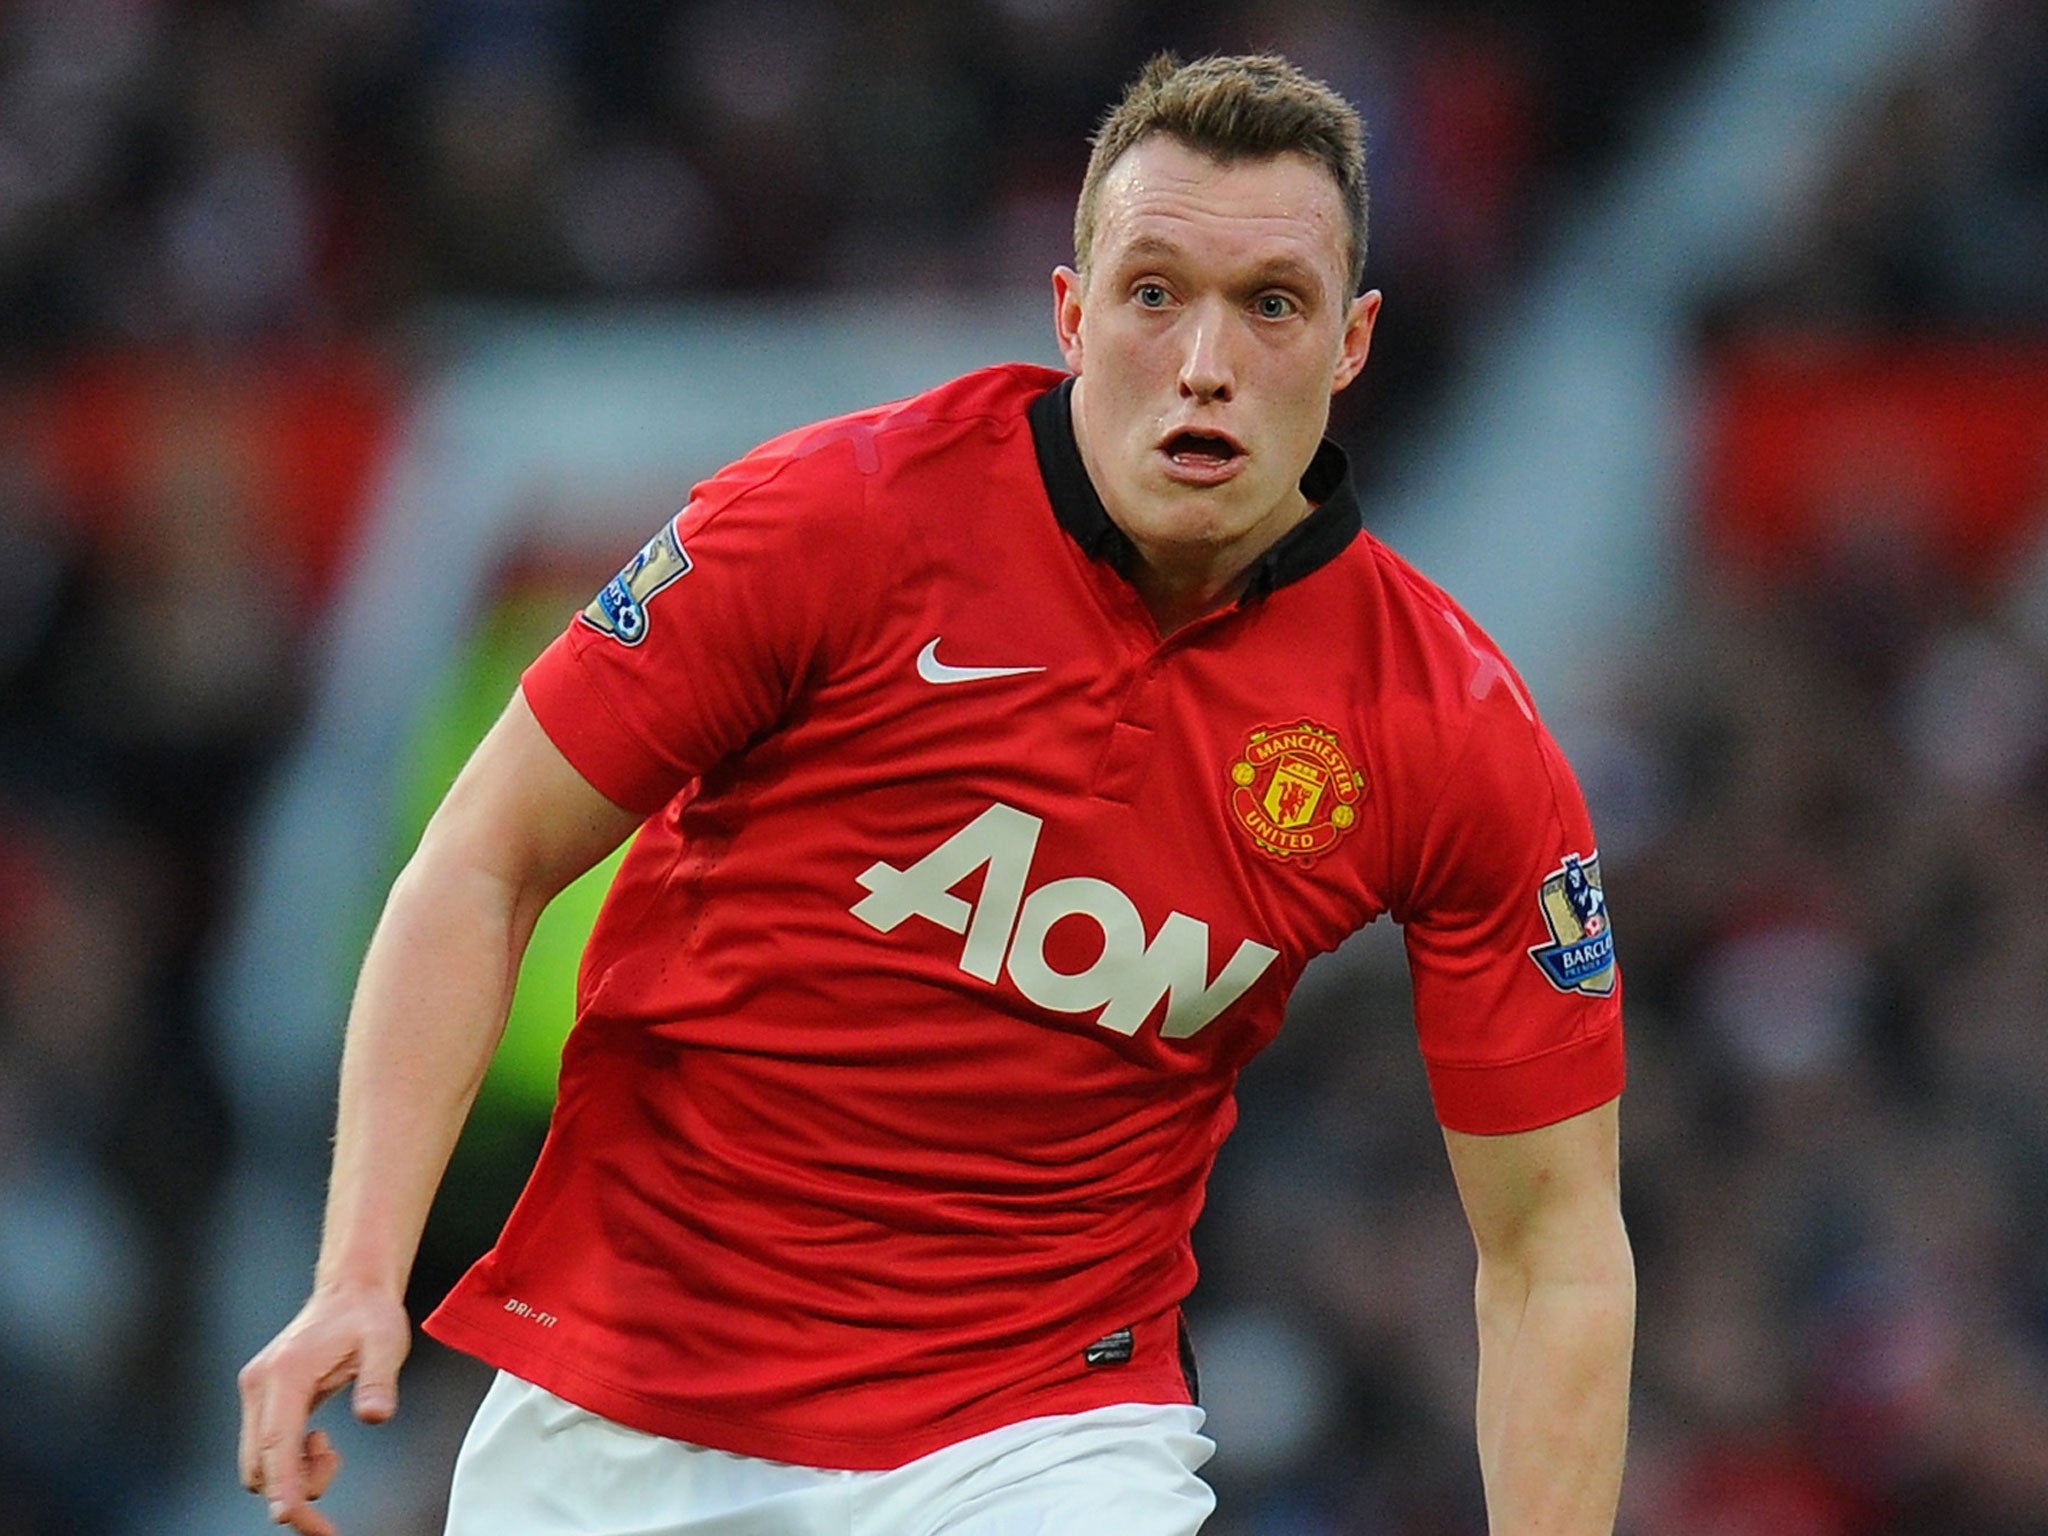 Phil Jones is enjoying his current role under David Moyes at Manchester United